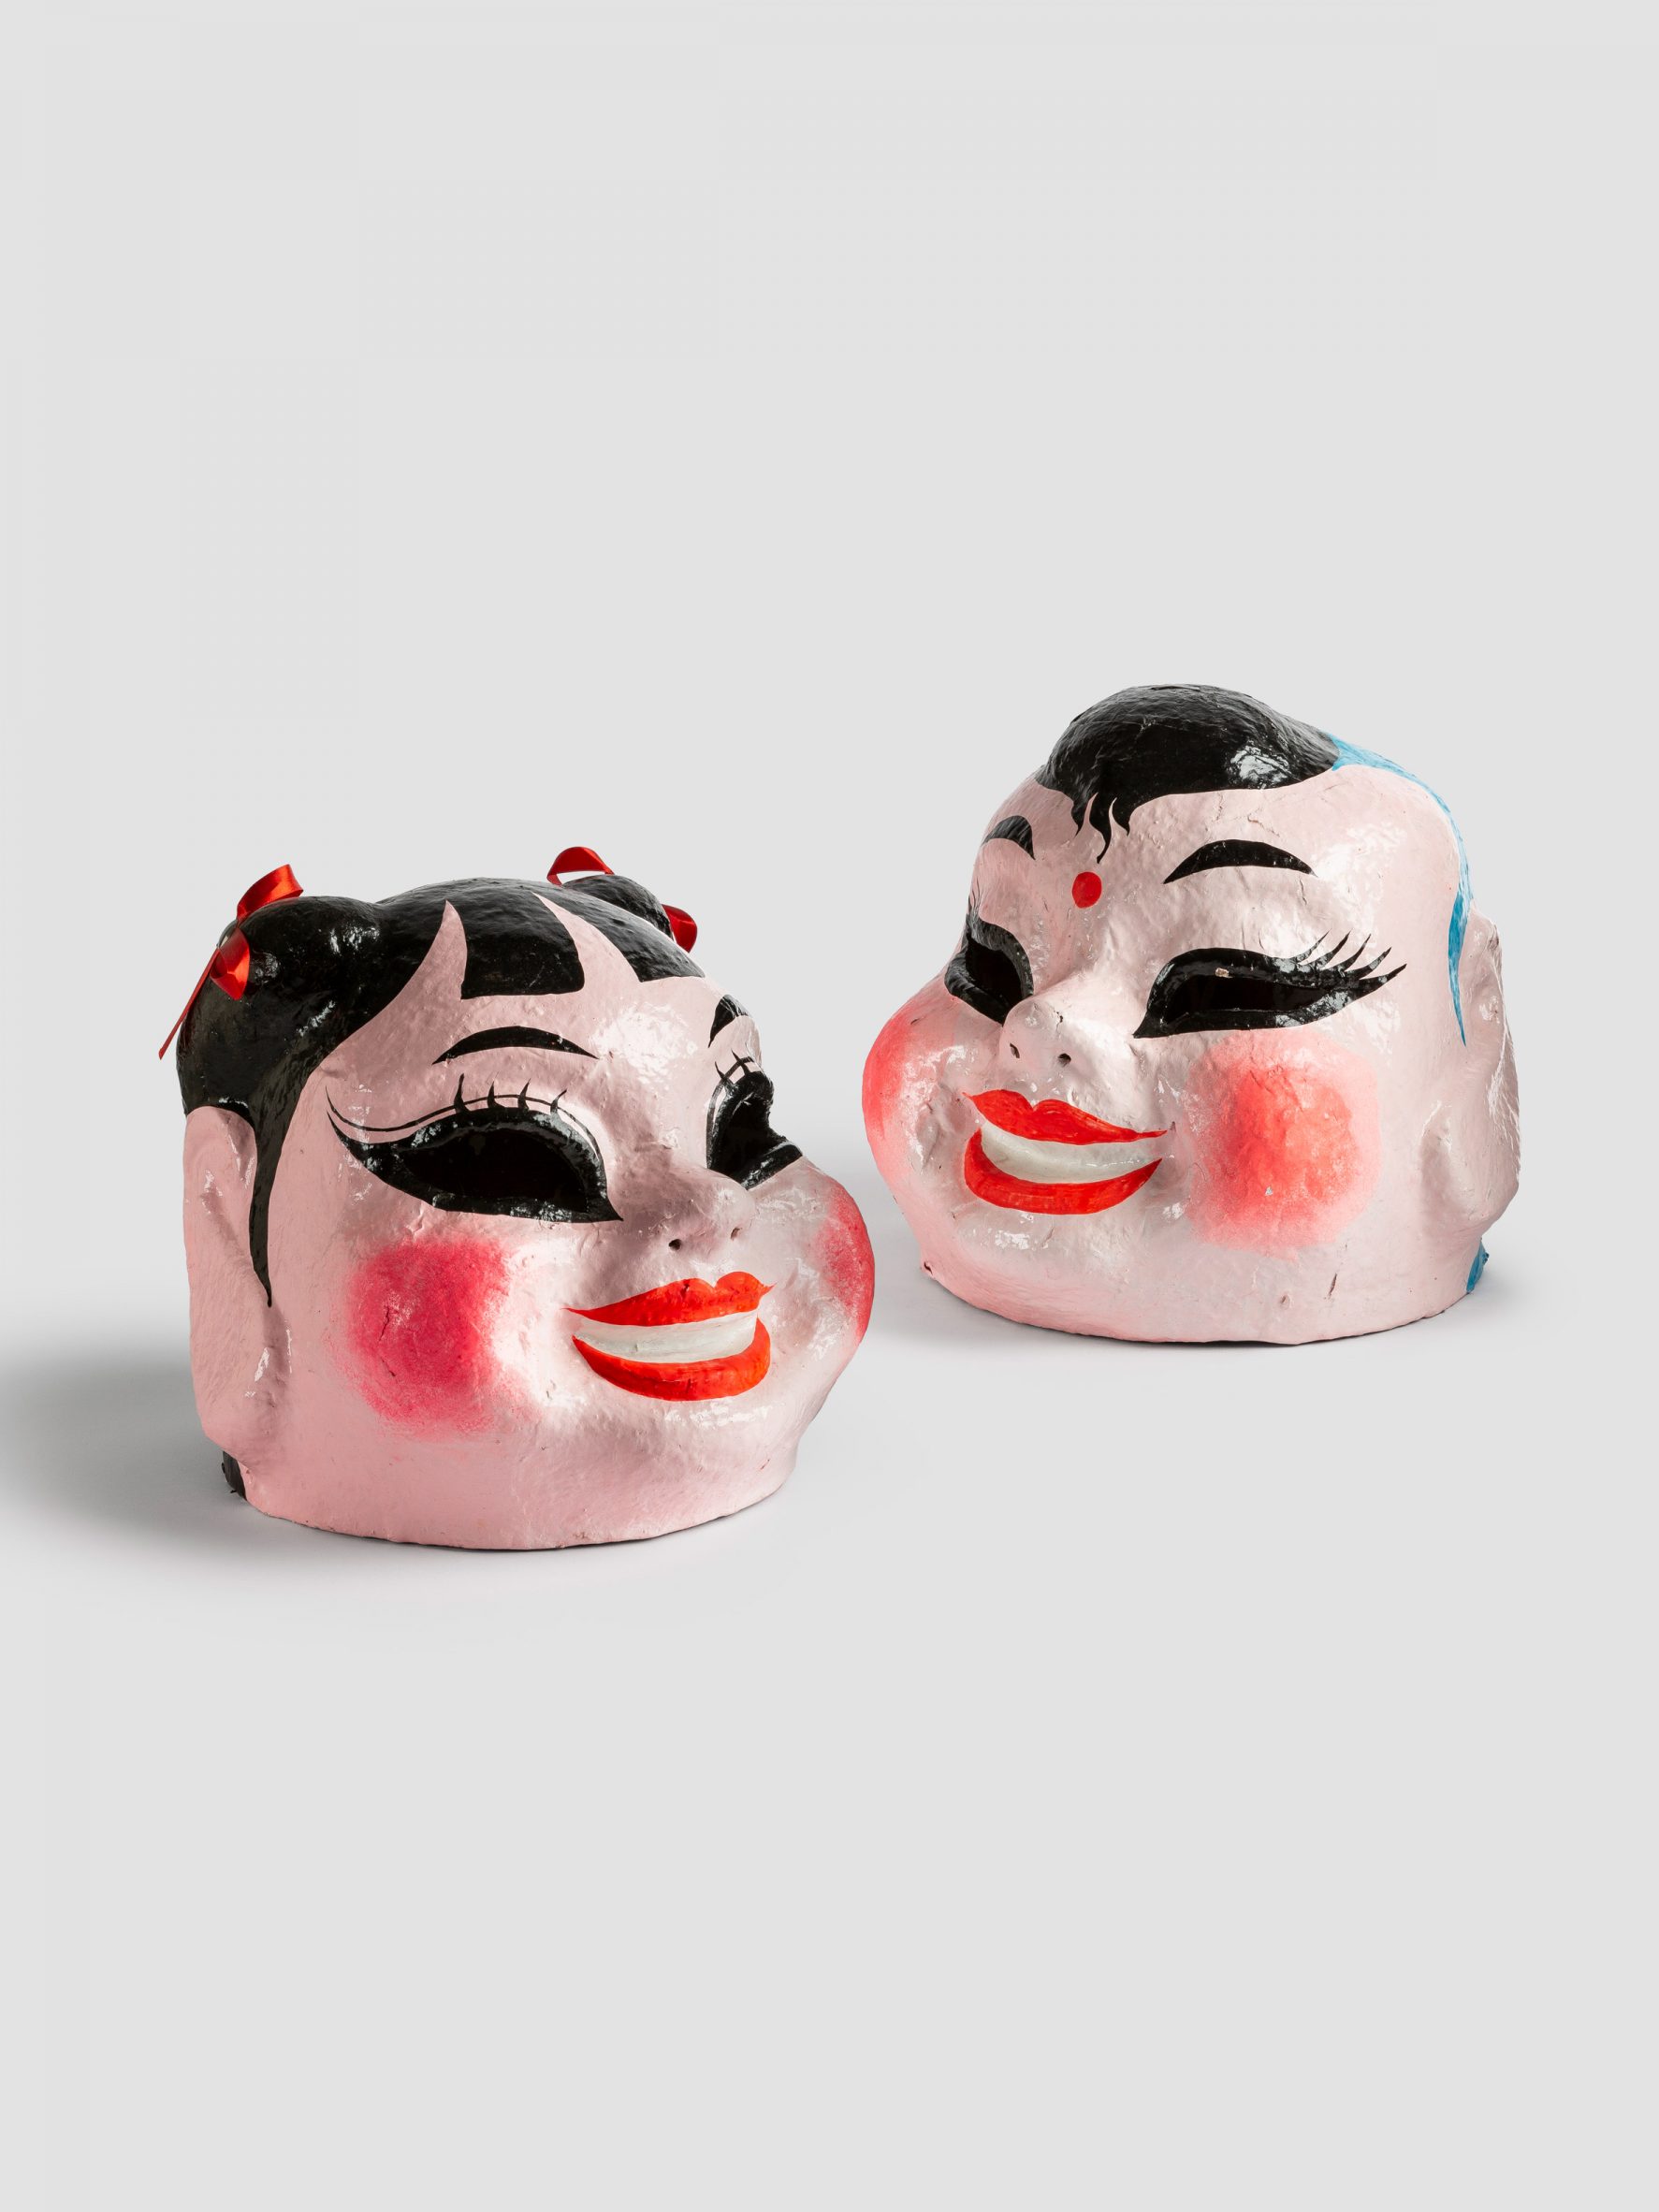 Masks of faces with red cheeks